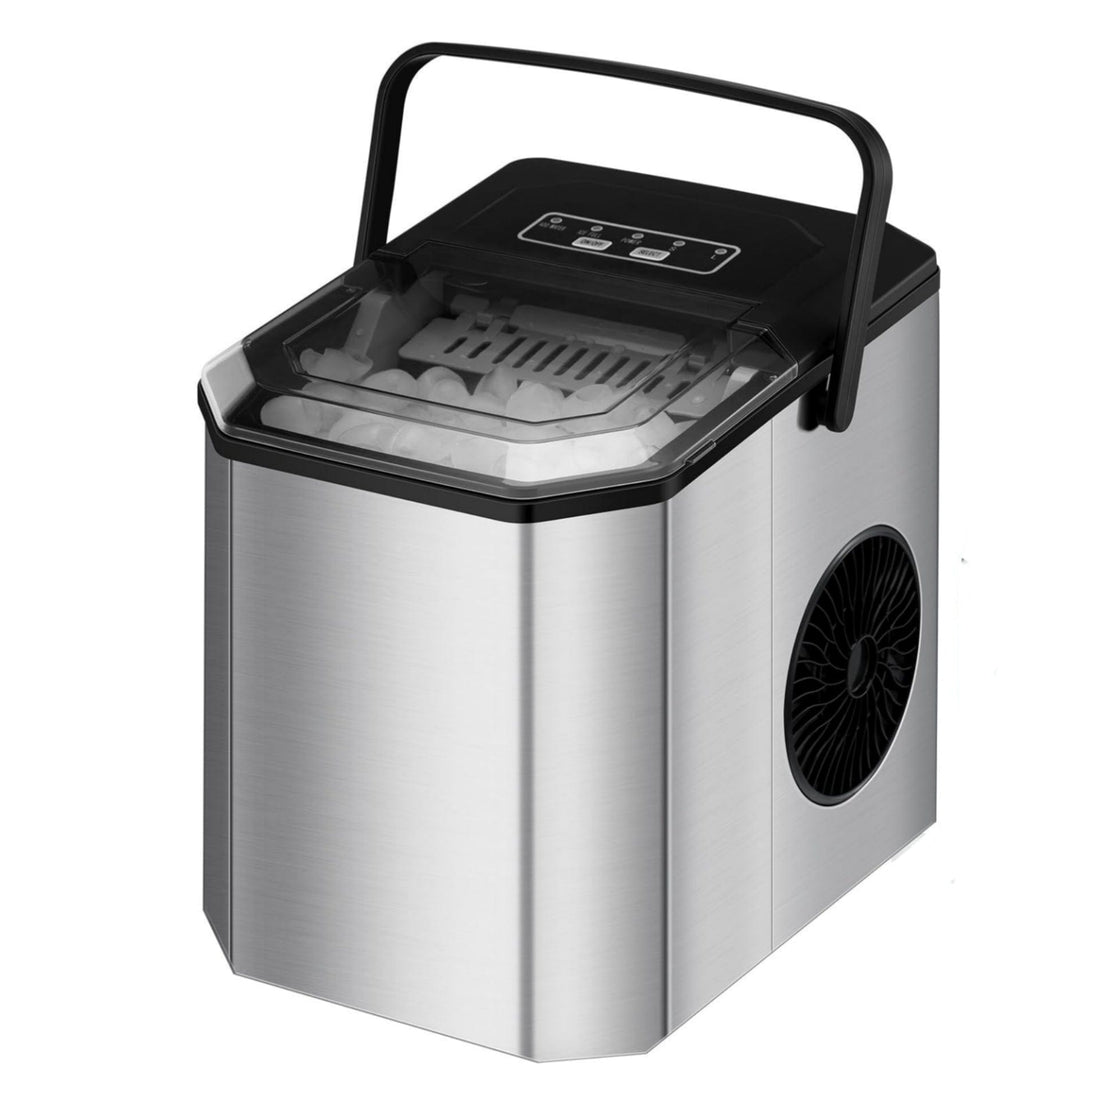 Portable Ice Maker Countertop 26 LBS in 24 Hours, with Ice Scoop & Basket